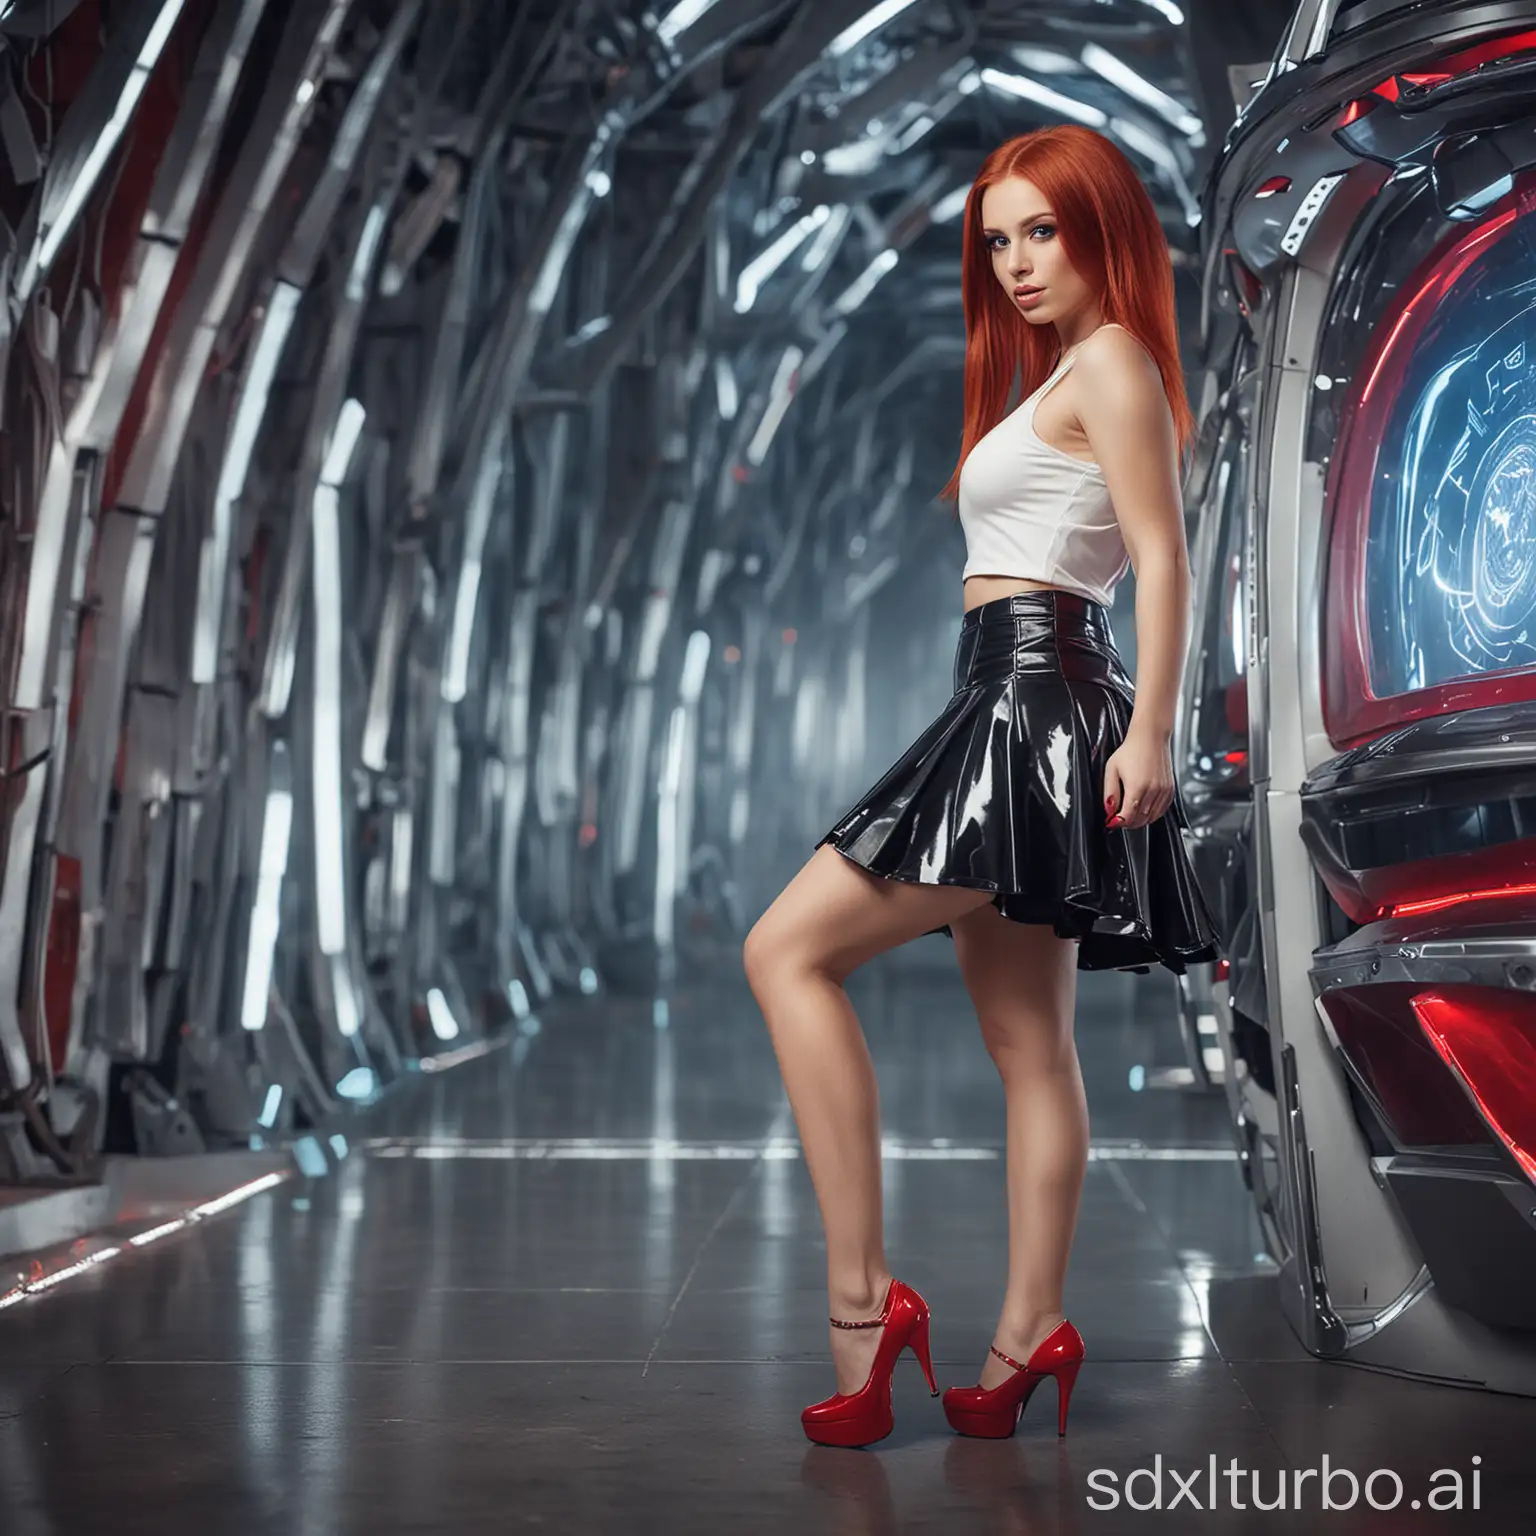 Caucasian woman with red hair wearing a miniskirt and high heels in futuristic setting